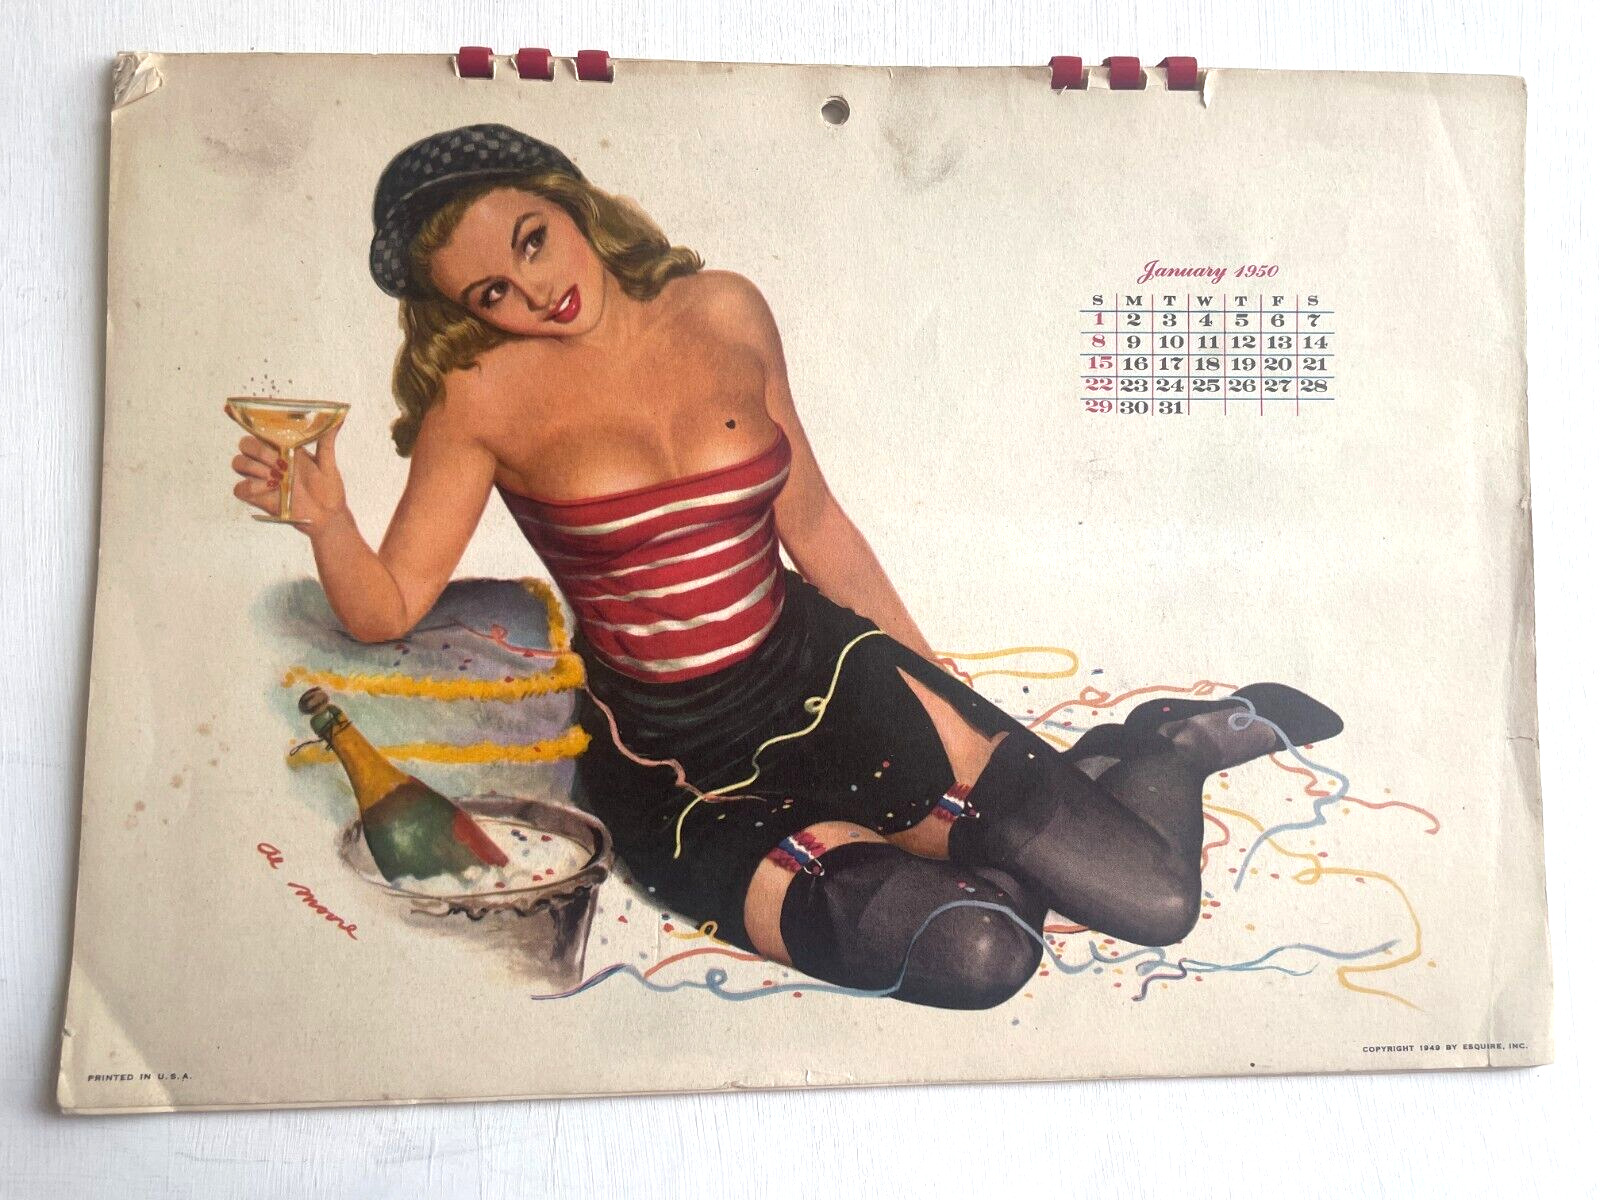 1950 Full Year 12 Month Pinup Girl Esquire Calendar by Al Moore